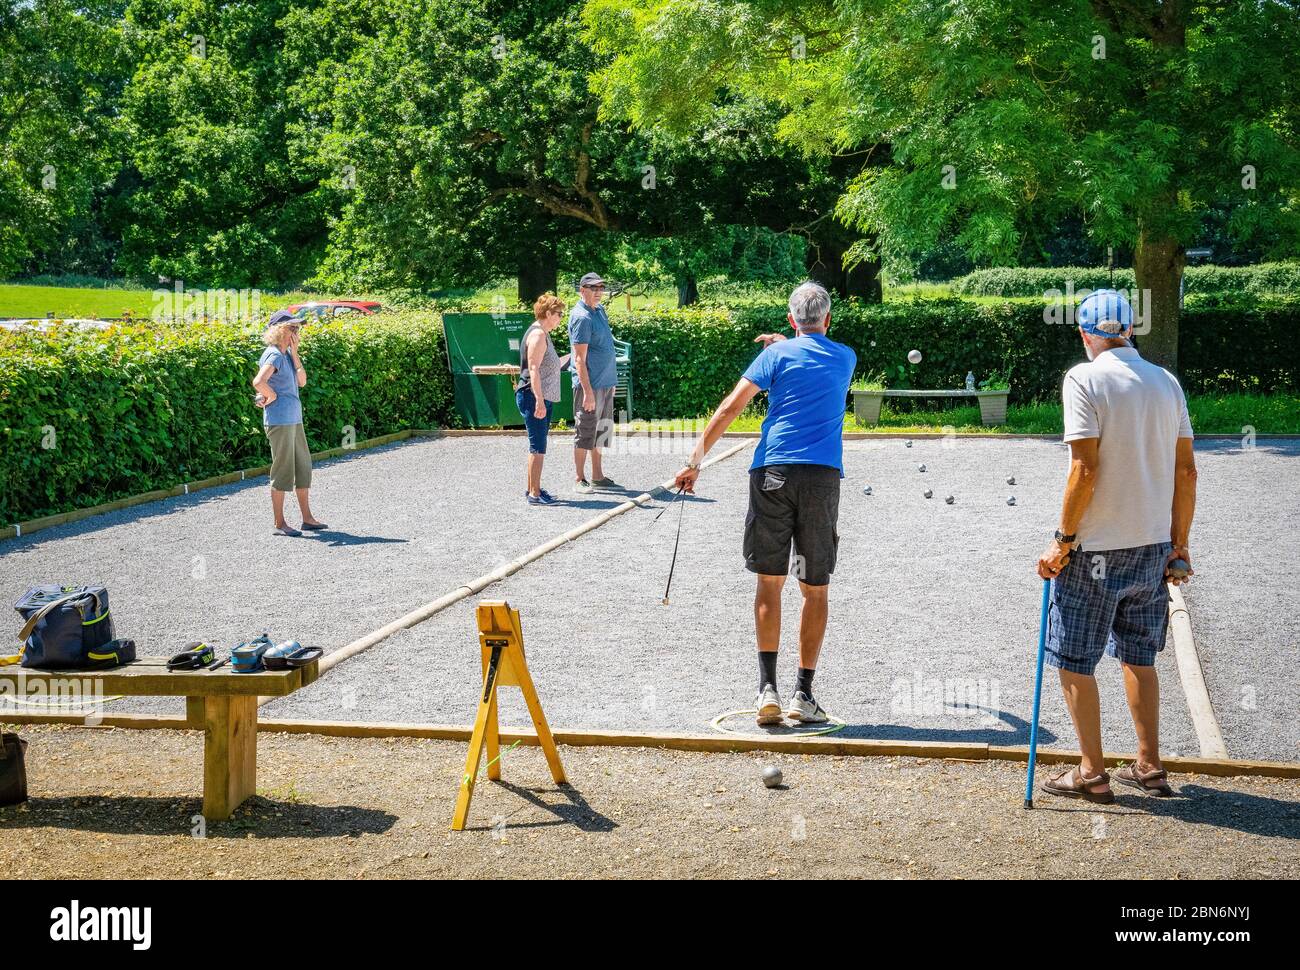 People in Upton Country Park Poole, Dorset, England, Playing the French game of Petanque (boule) Stock Photo